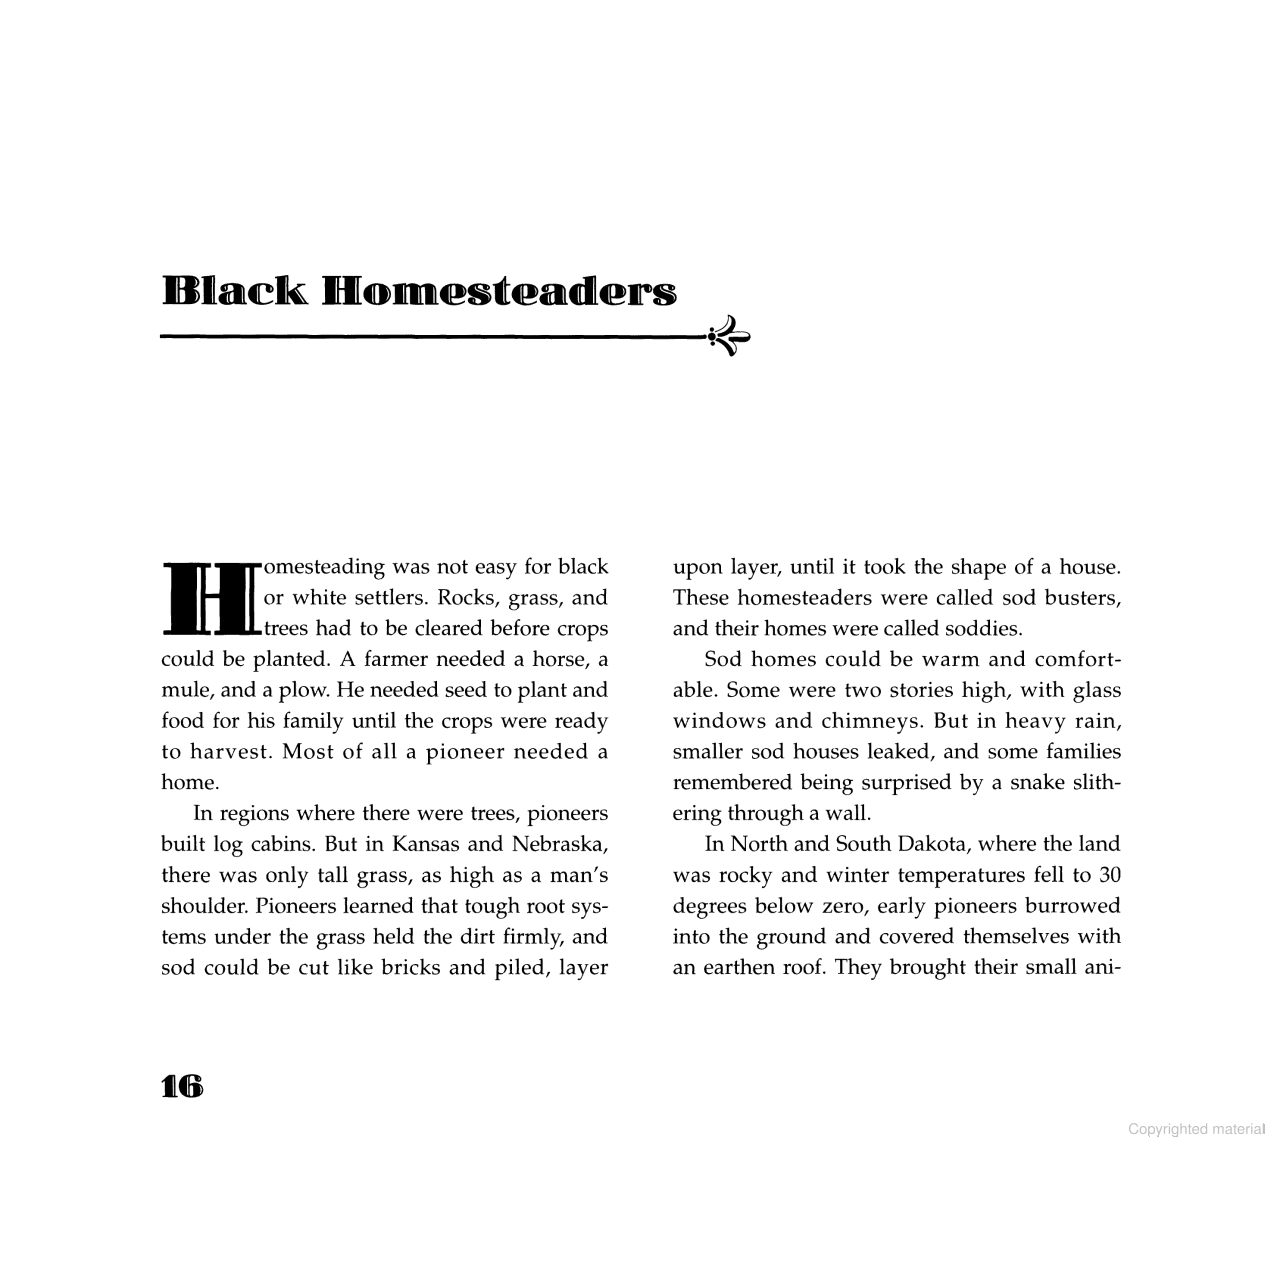 Black Frontiers: A History of African American Heroes in the Old West by Lillian Schlissel